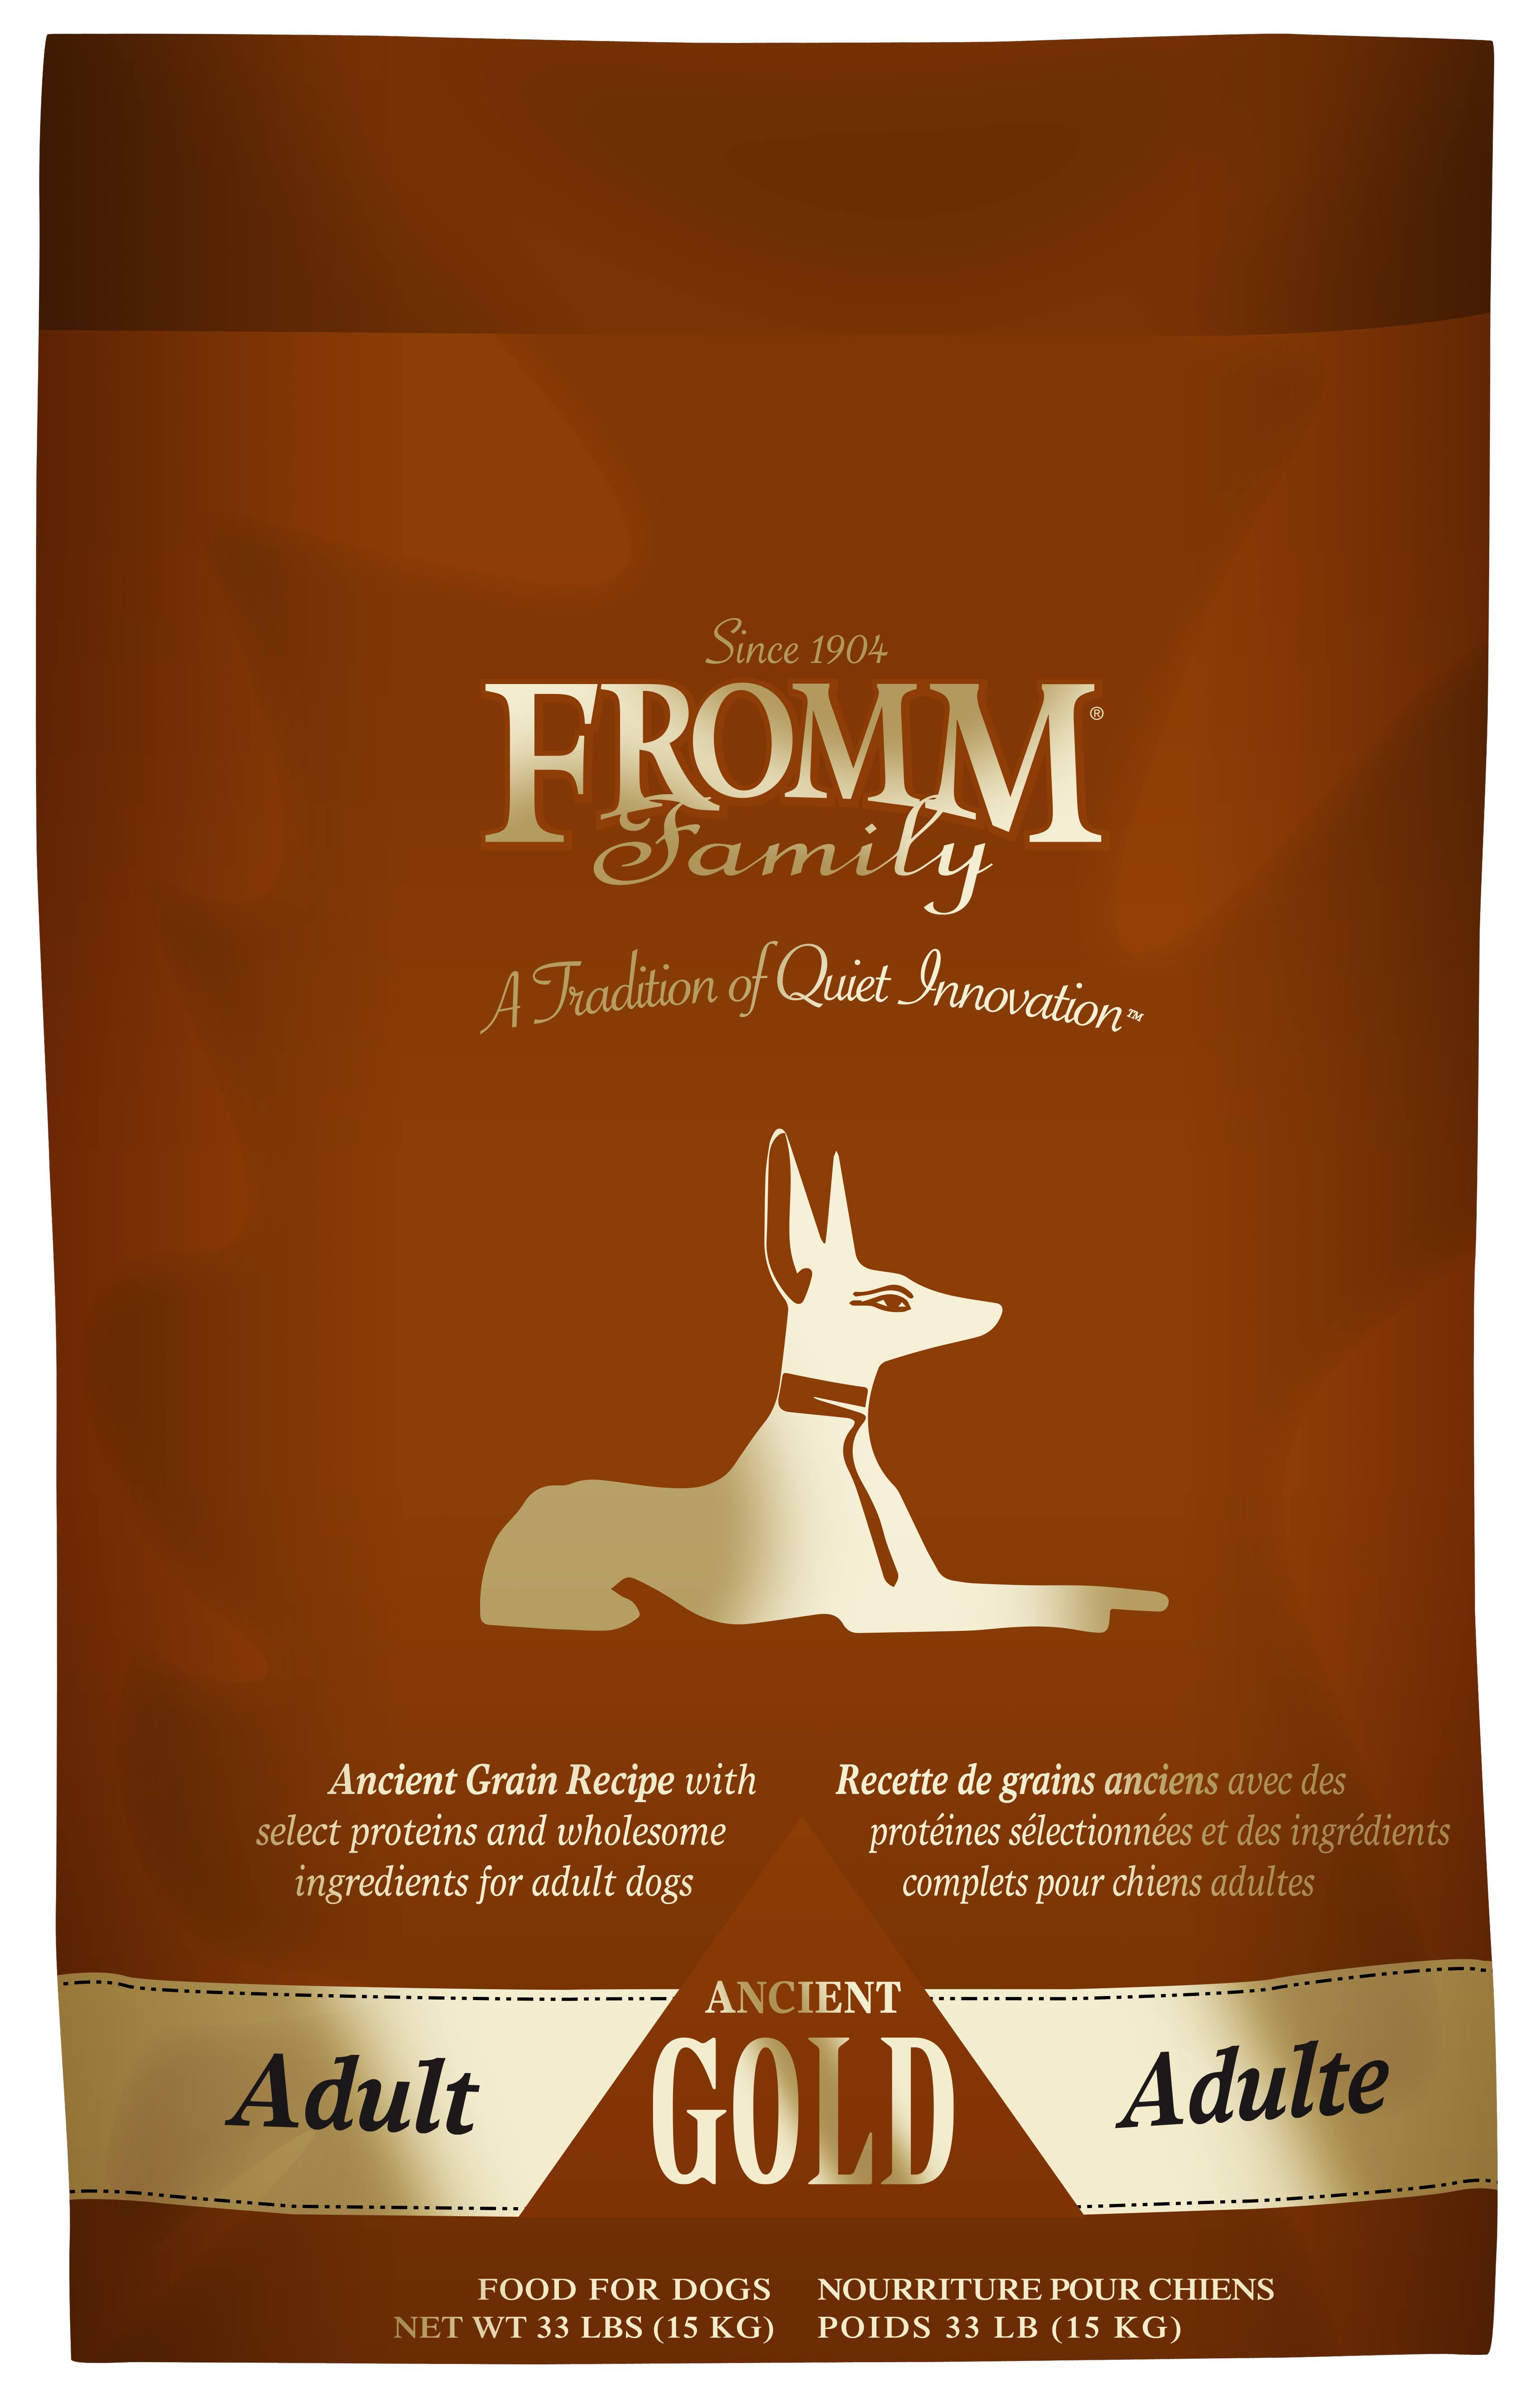 Fromm Family Adult Ancient Gold Dry Dog Food - 30 lb